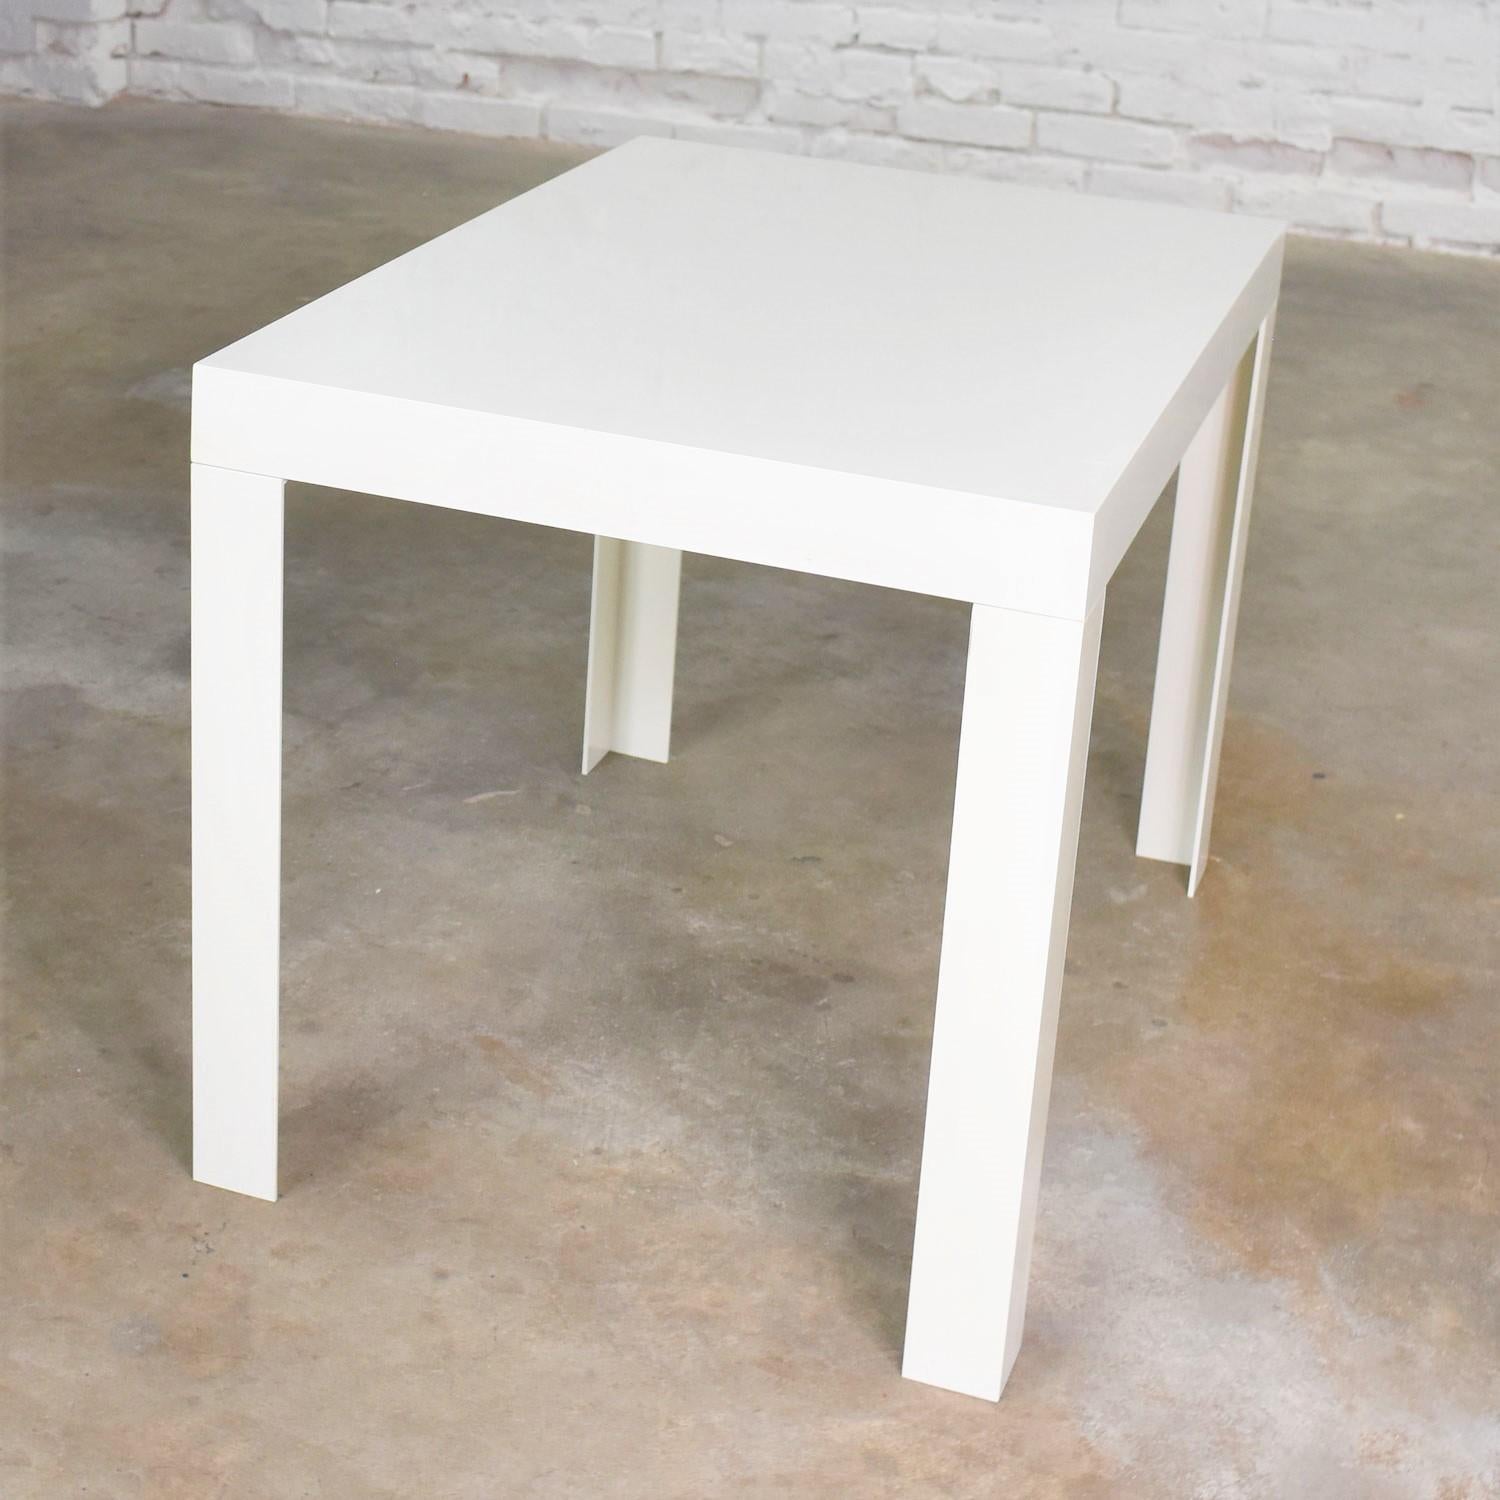 Late 20th Century Modern White Molded Plastic Rectangular Parsons Style Side Table Style Syroco For Sale